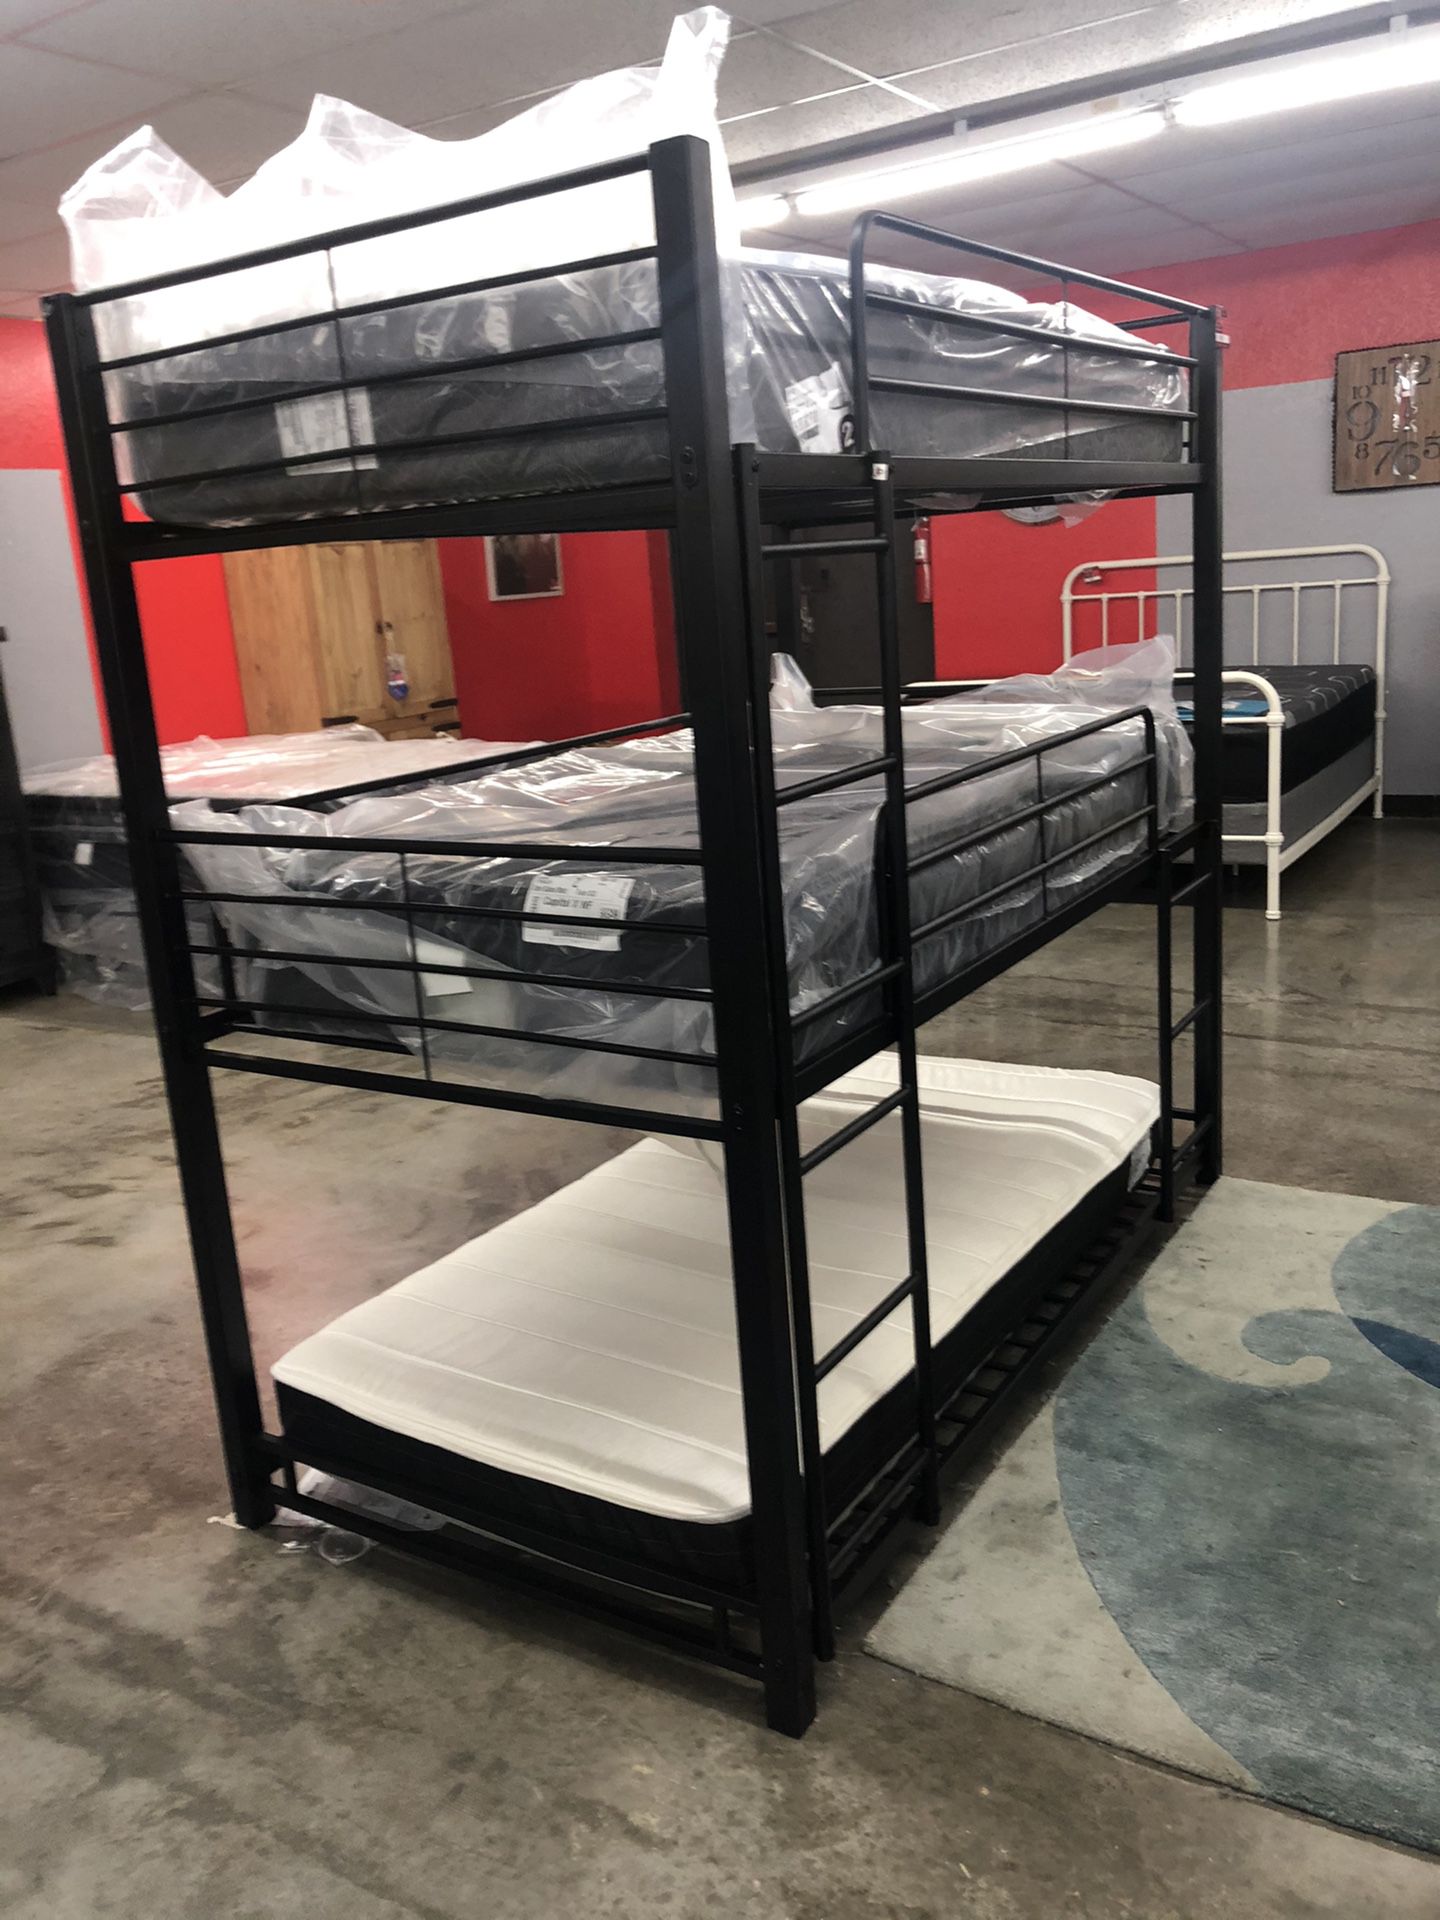 Triple Decker Bunk Bed On Sale Now With Mattresses!! 